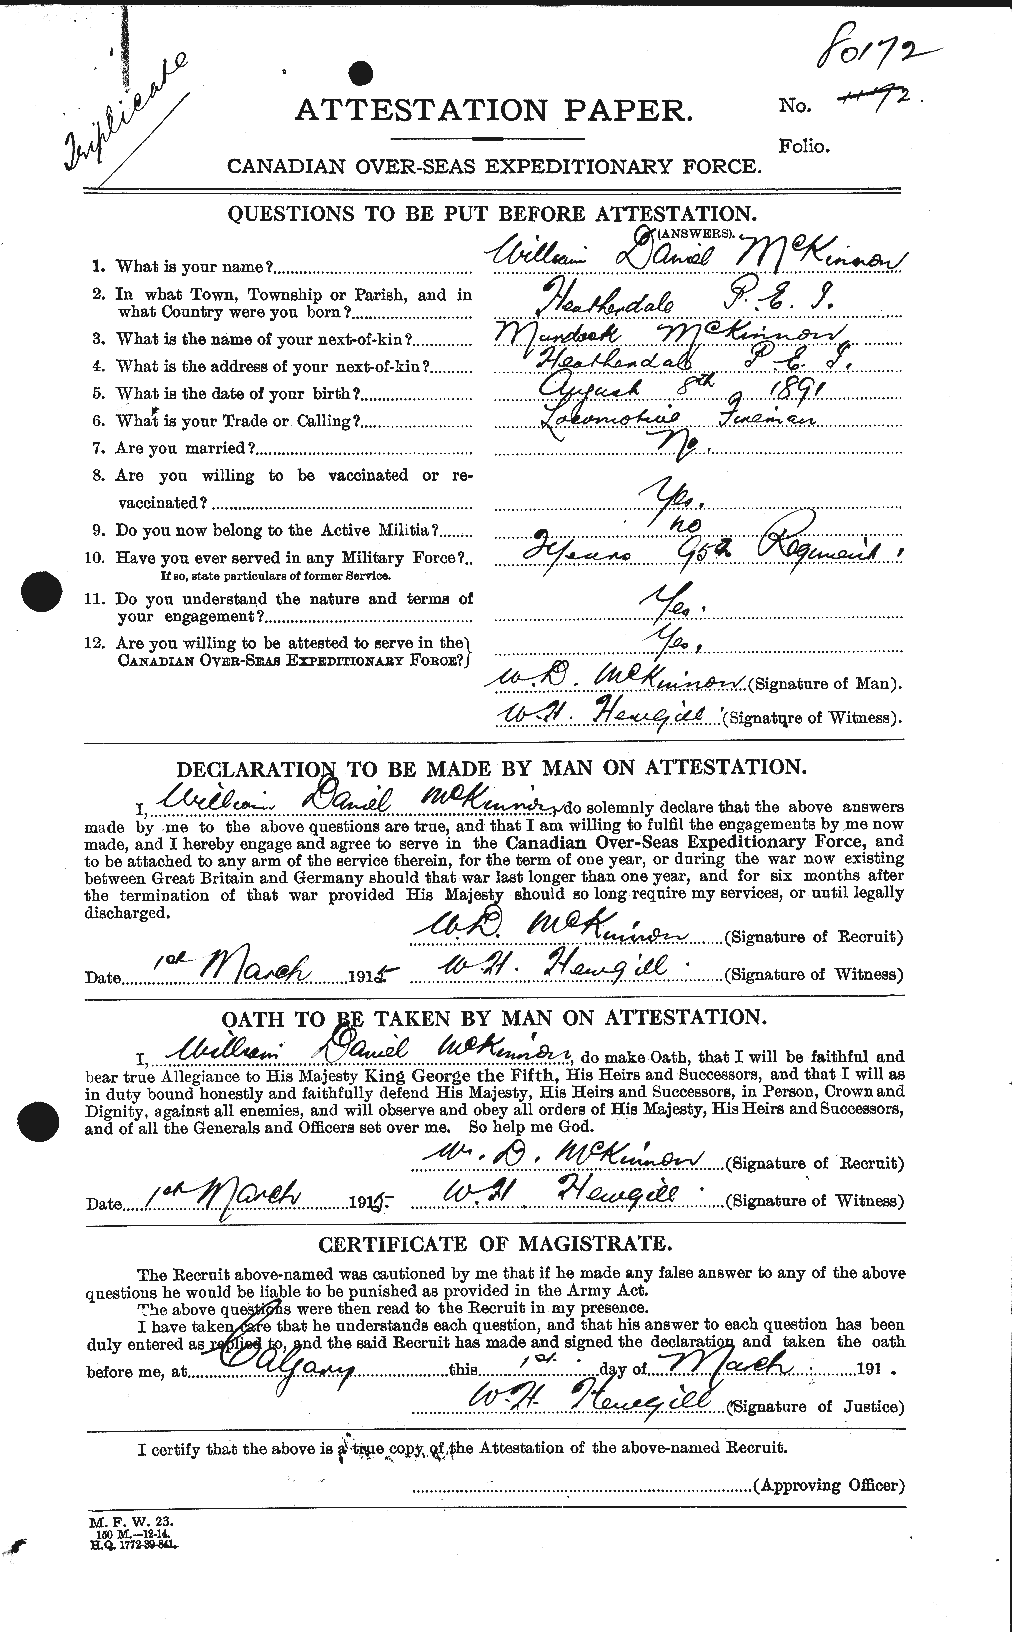 Personnel Records of the First World War - CEF 534319a